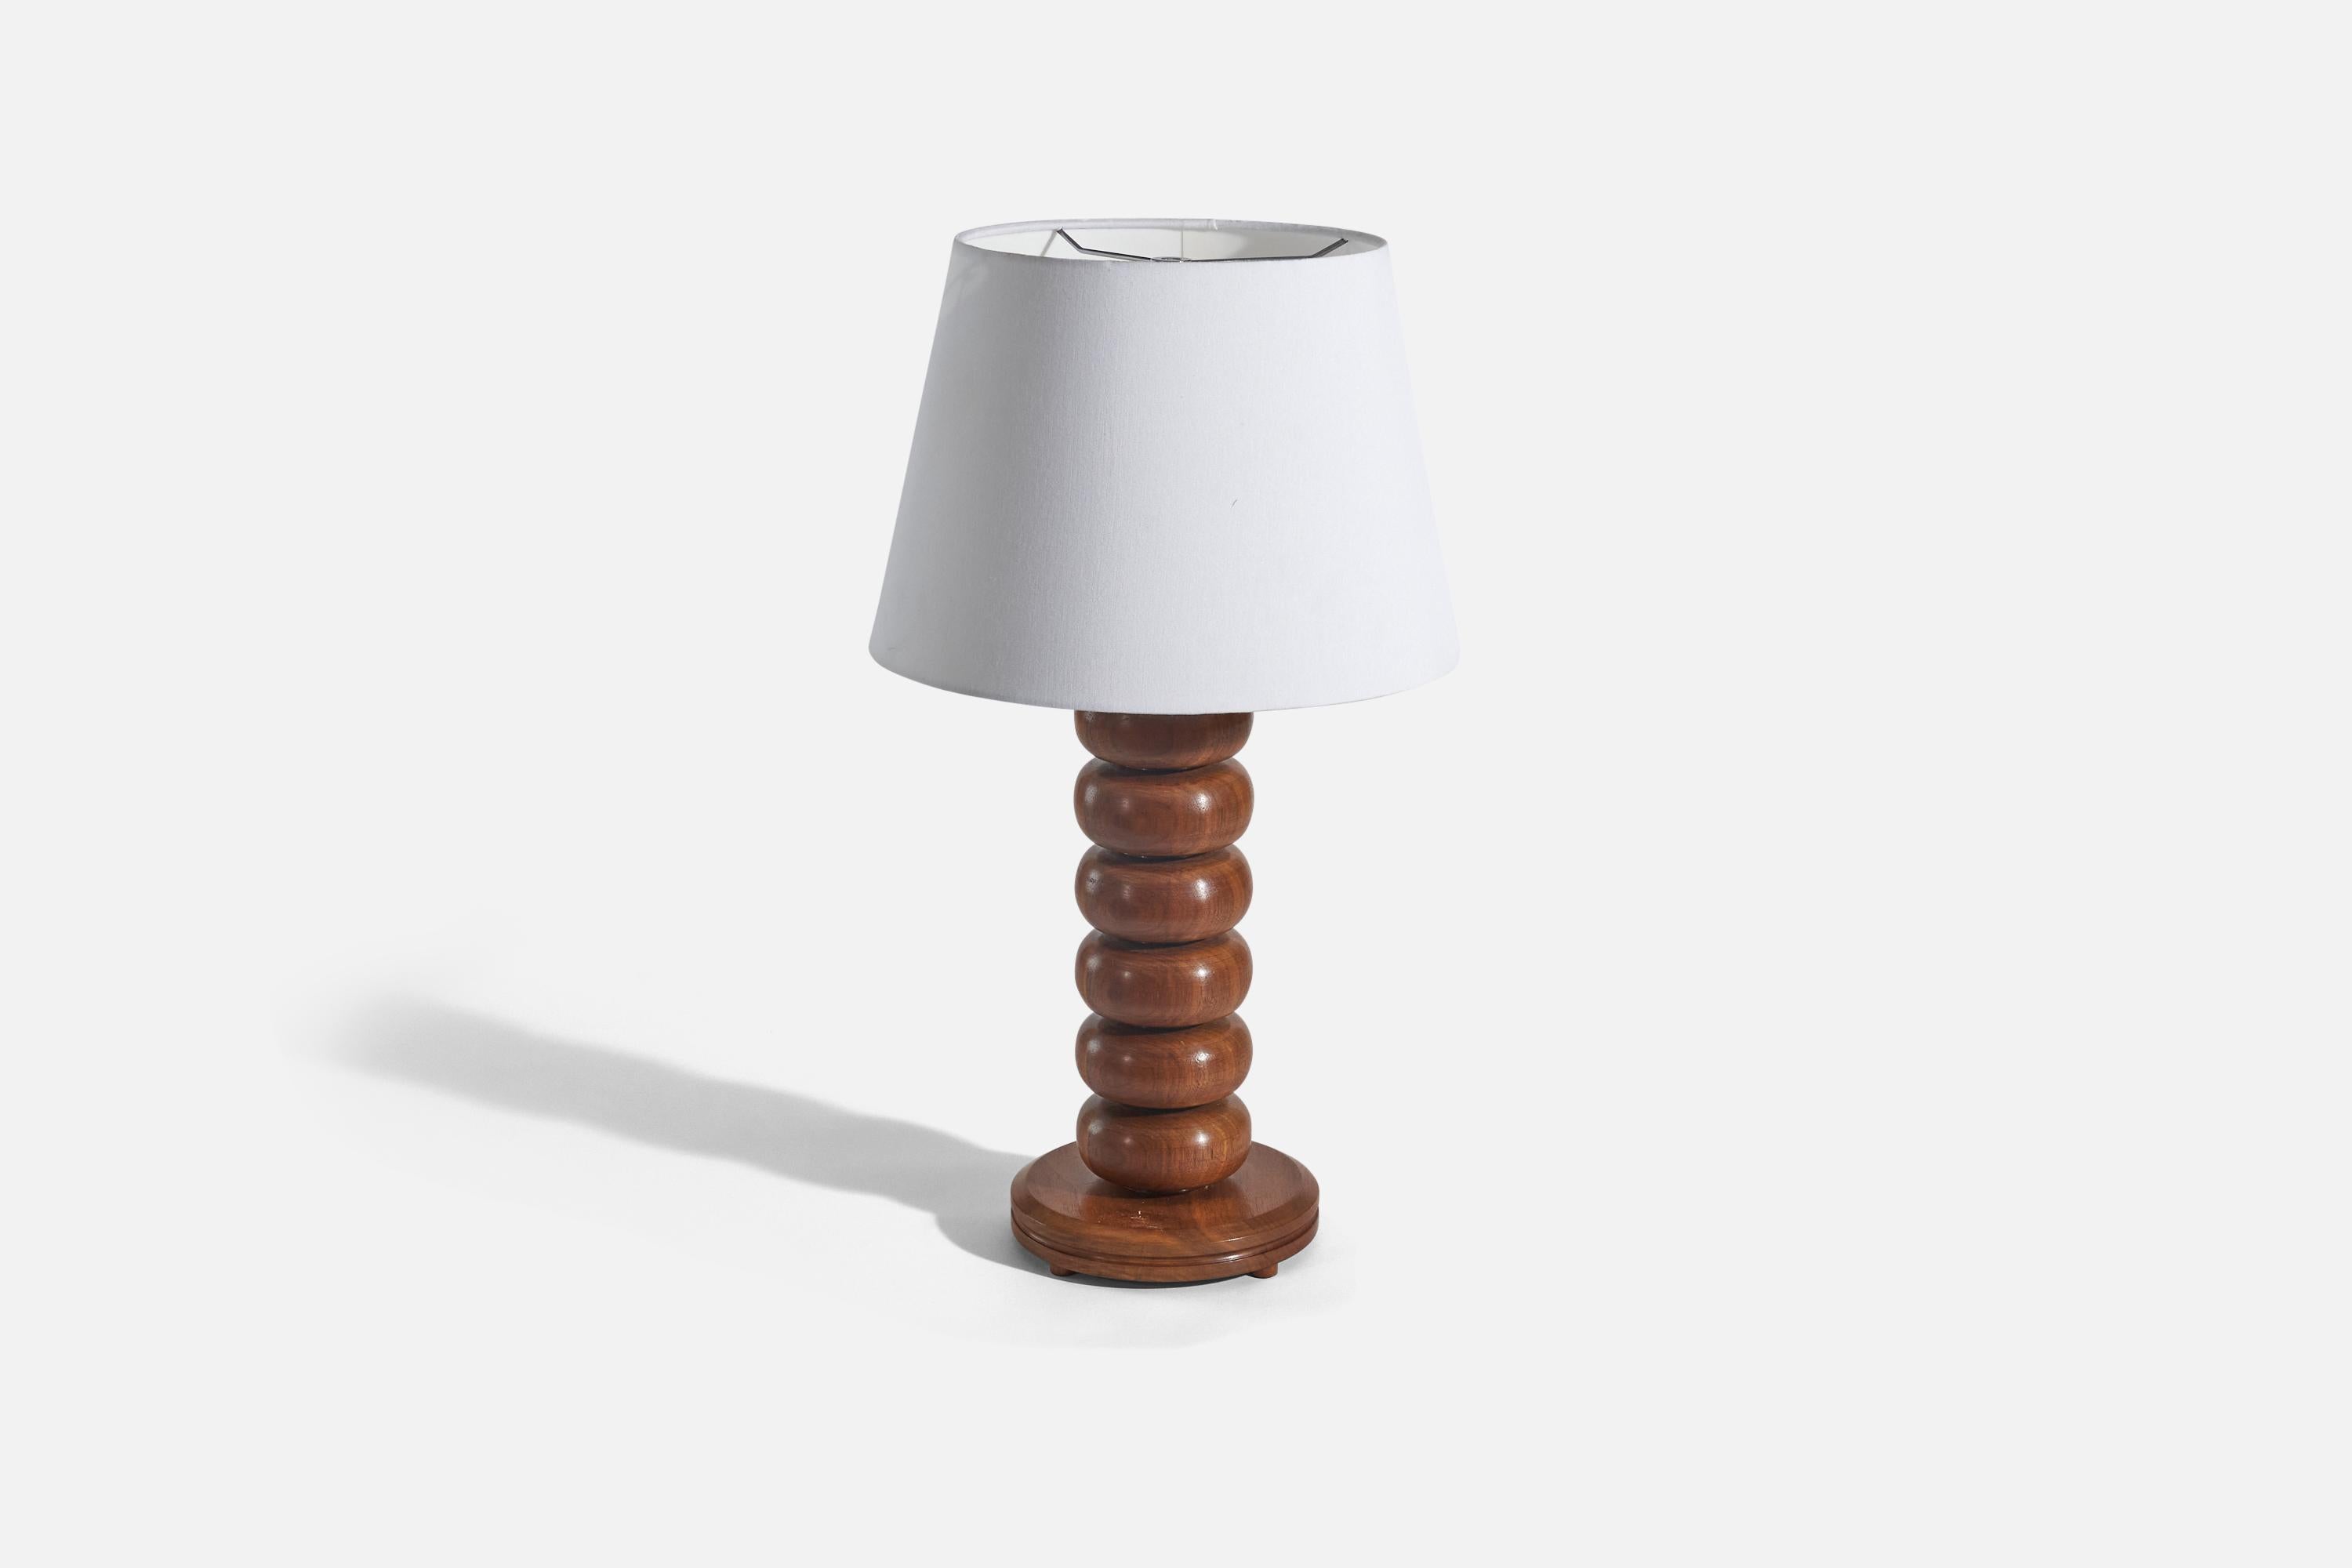 A pine table lamp designed and produced in Sweden, 1970s.

Sold without lampshade. 
Dimensions of Lamp (inches) : 17.68 x 7.62 x 7.62 (Height x Width x Depth)
Dimensions of Shade (inches) : 10 x 14.12 x 10 (Top Diameter x Bottom Diameter x